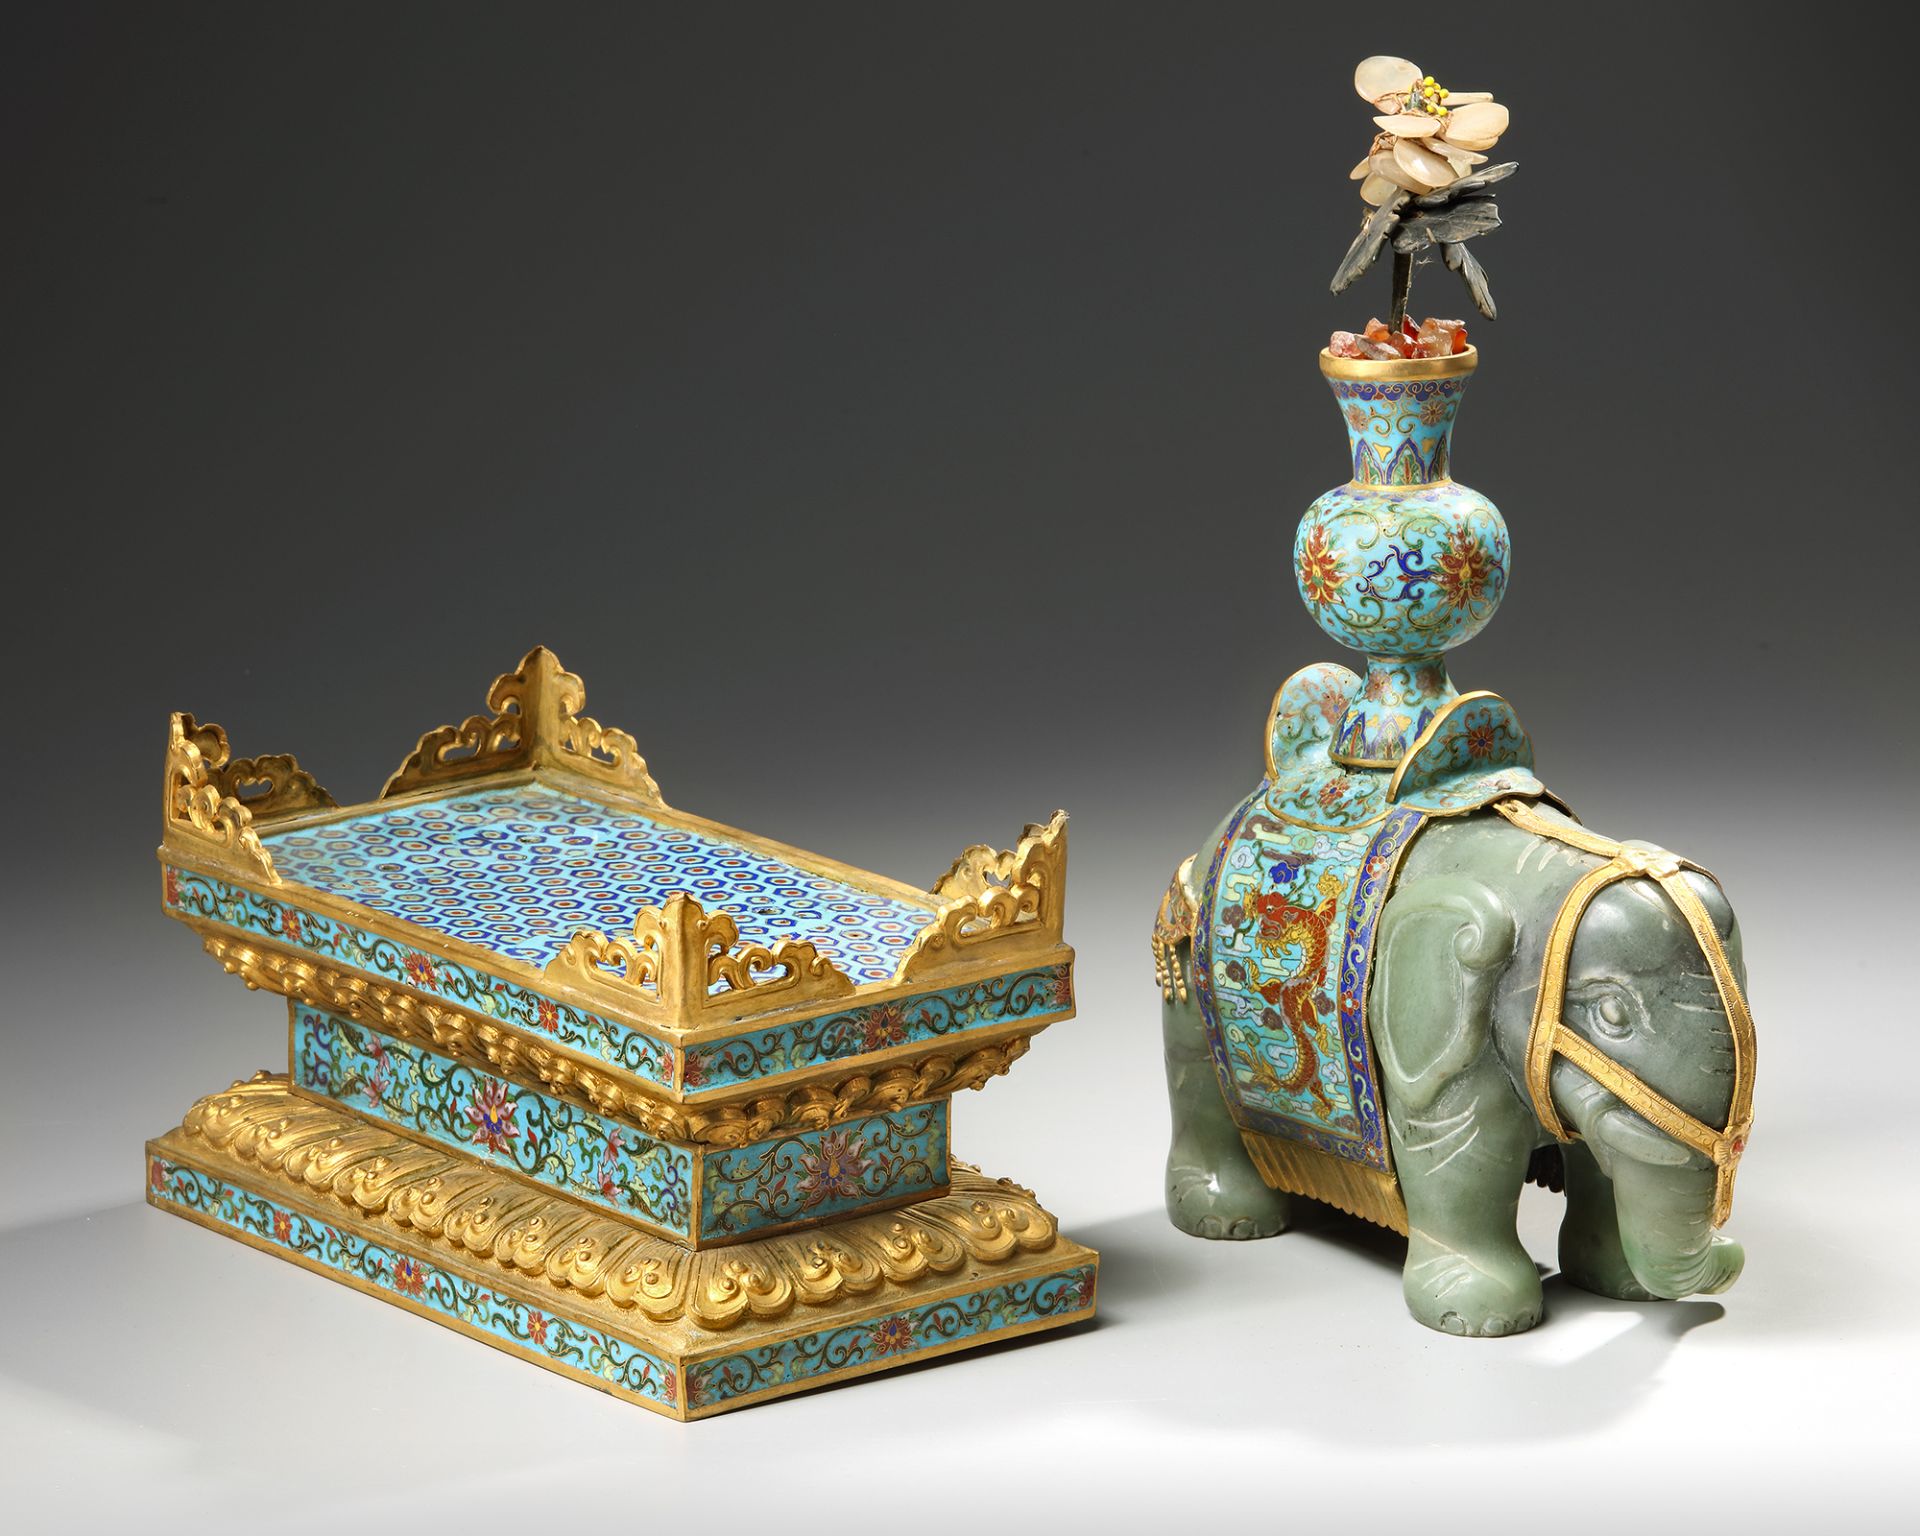 A CHINESE JADE AND CLOISONNÉ CAPARISONED ELEPHANT ON A CLOISONNÉ BASE - Image 5 of 6